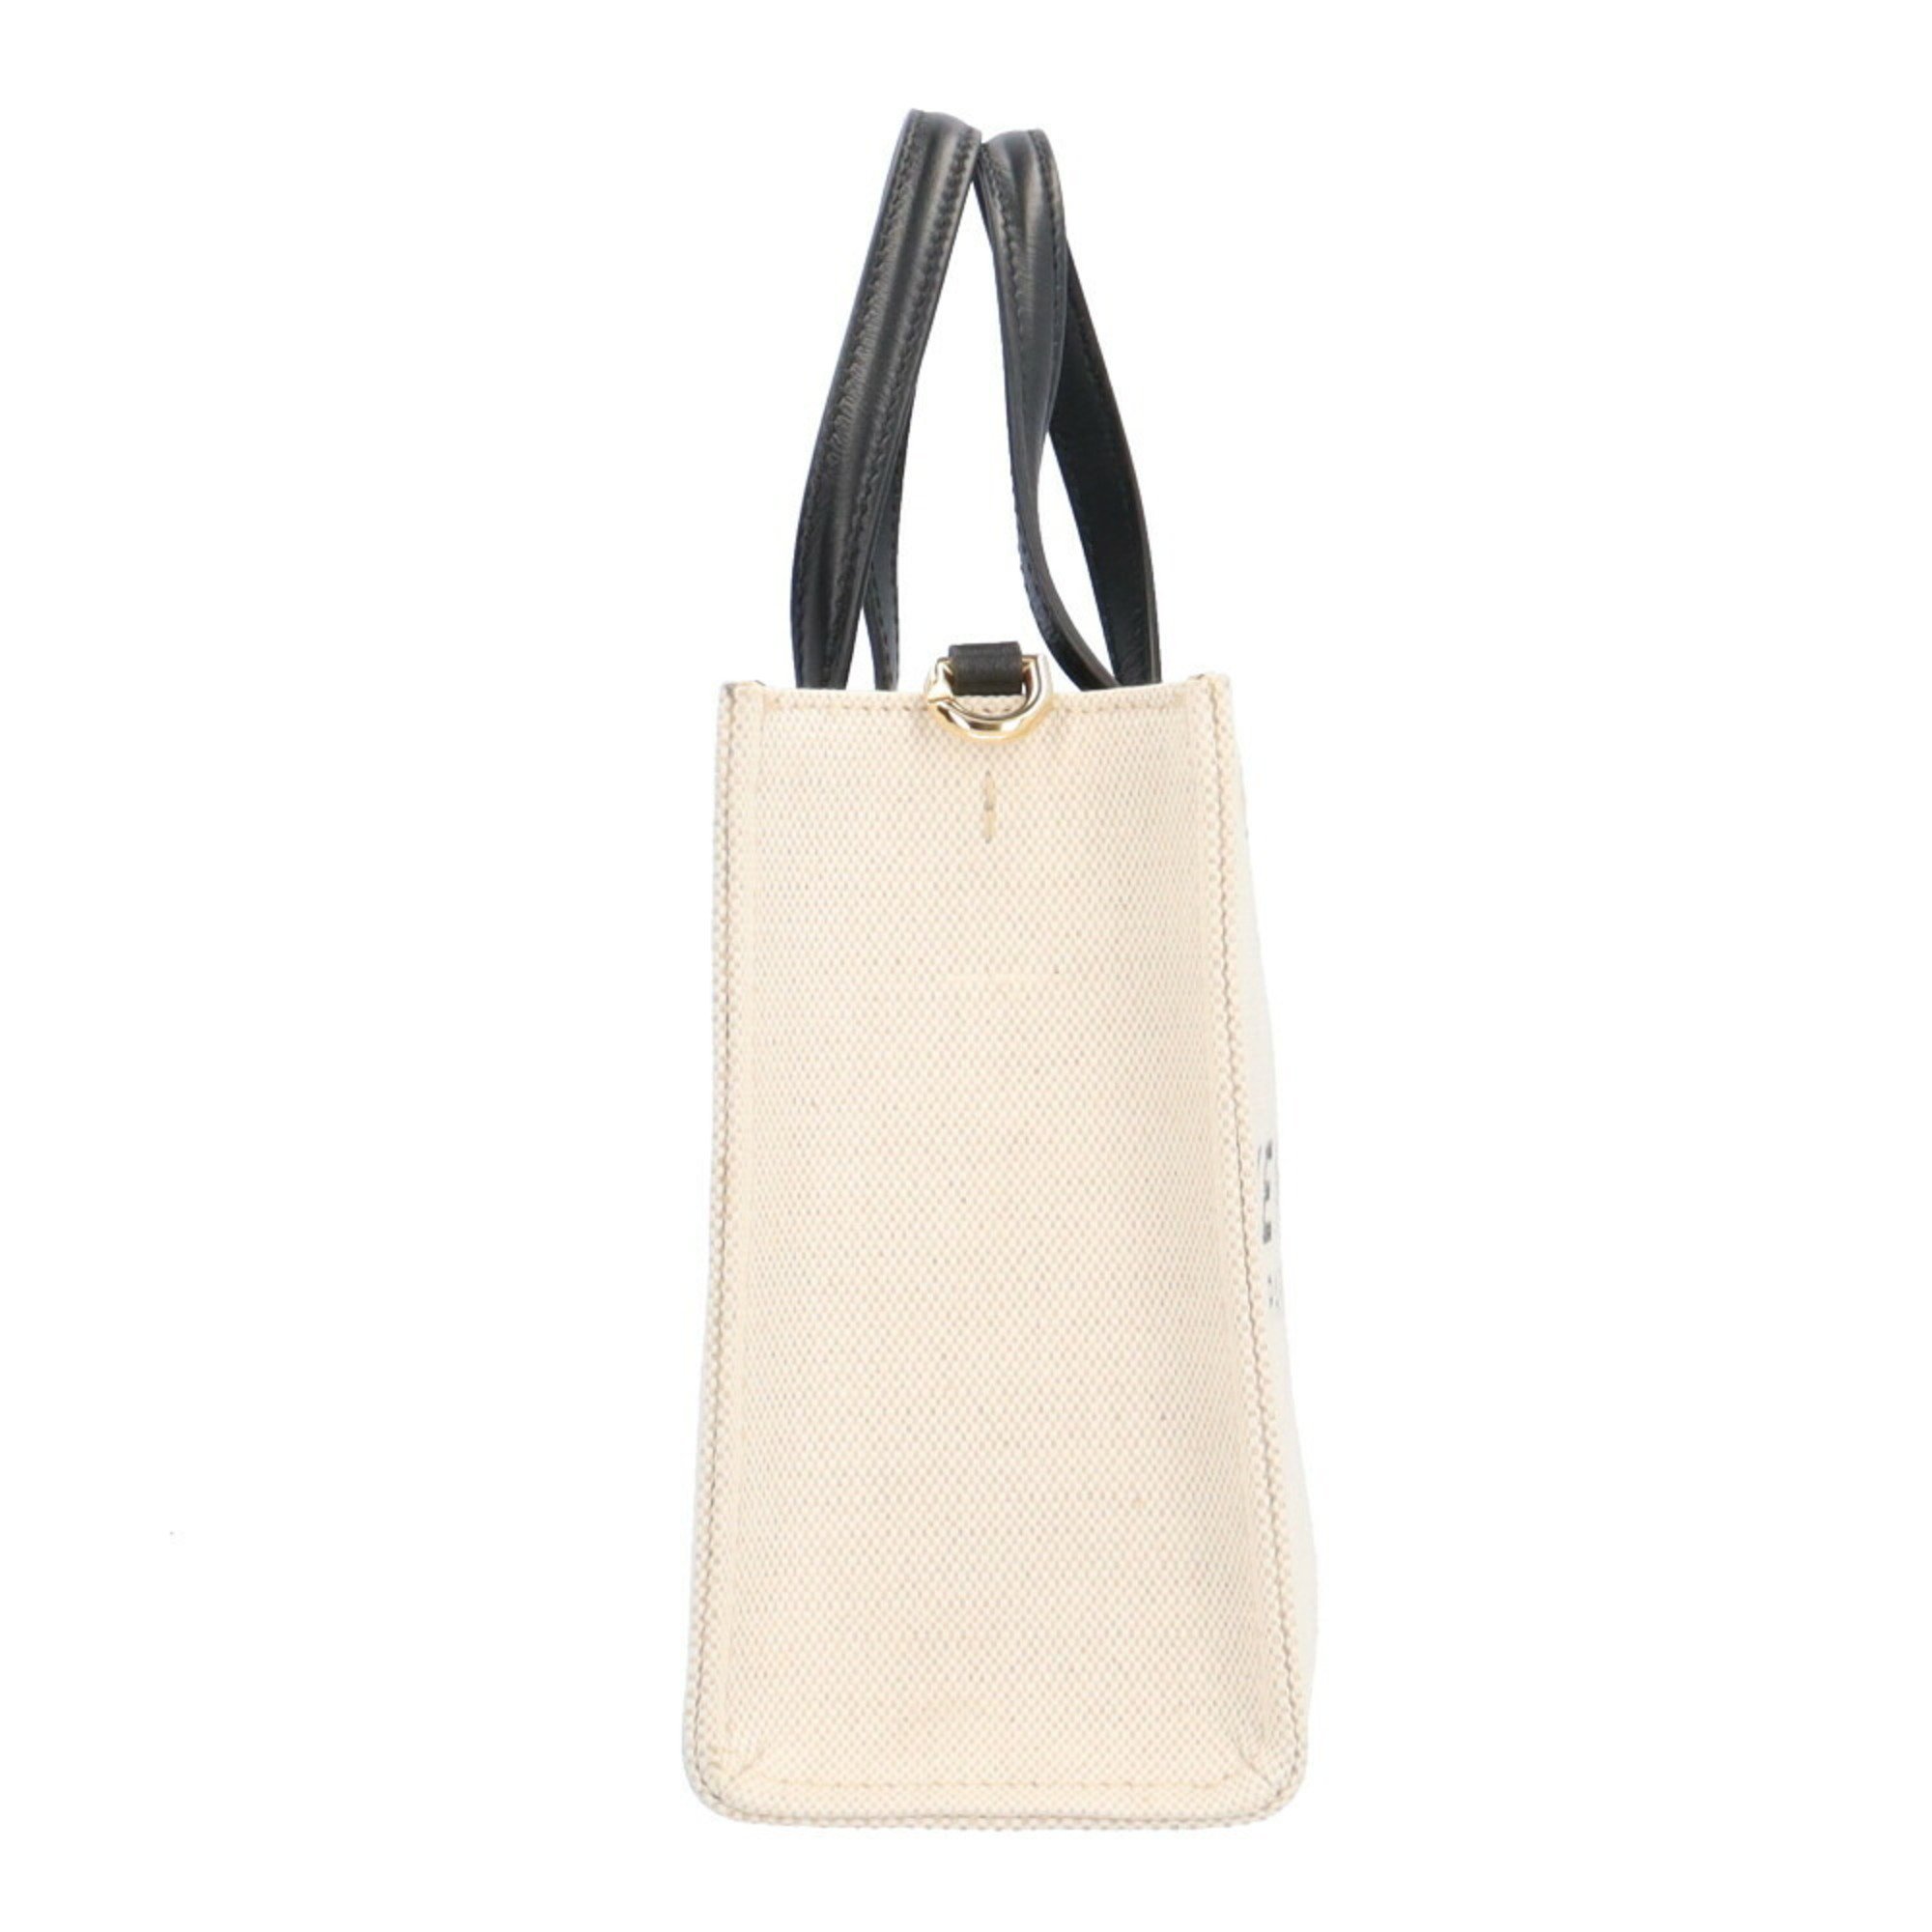 Givenchy G-Tote Bag Tote Cotton BB50N0B1DR 255 Beige Women's 2way